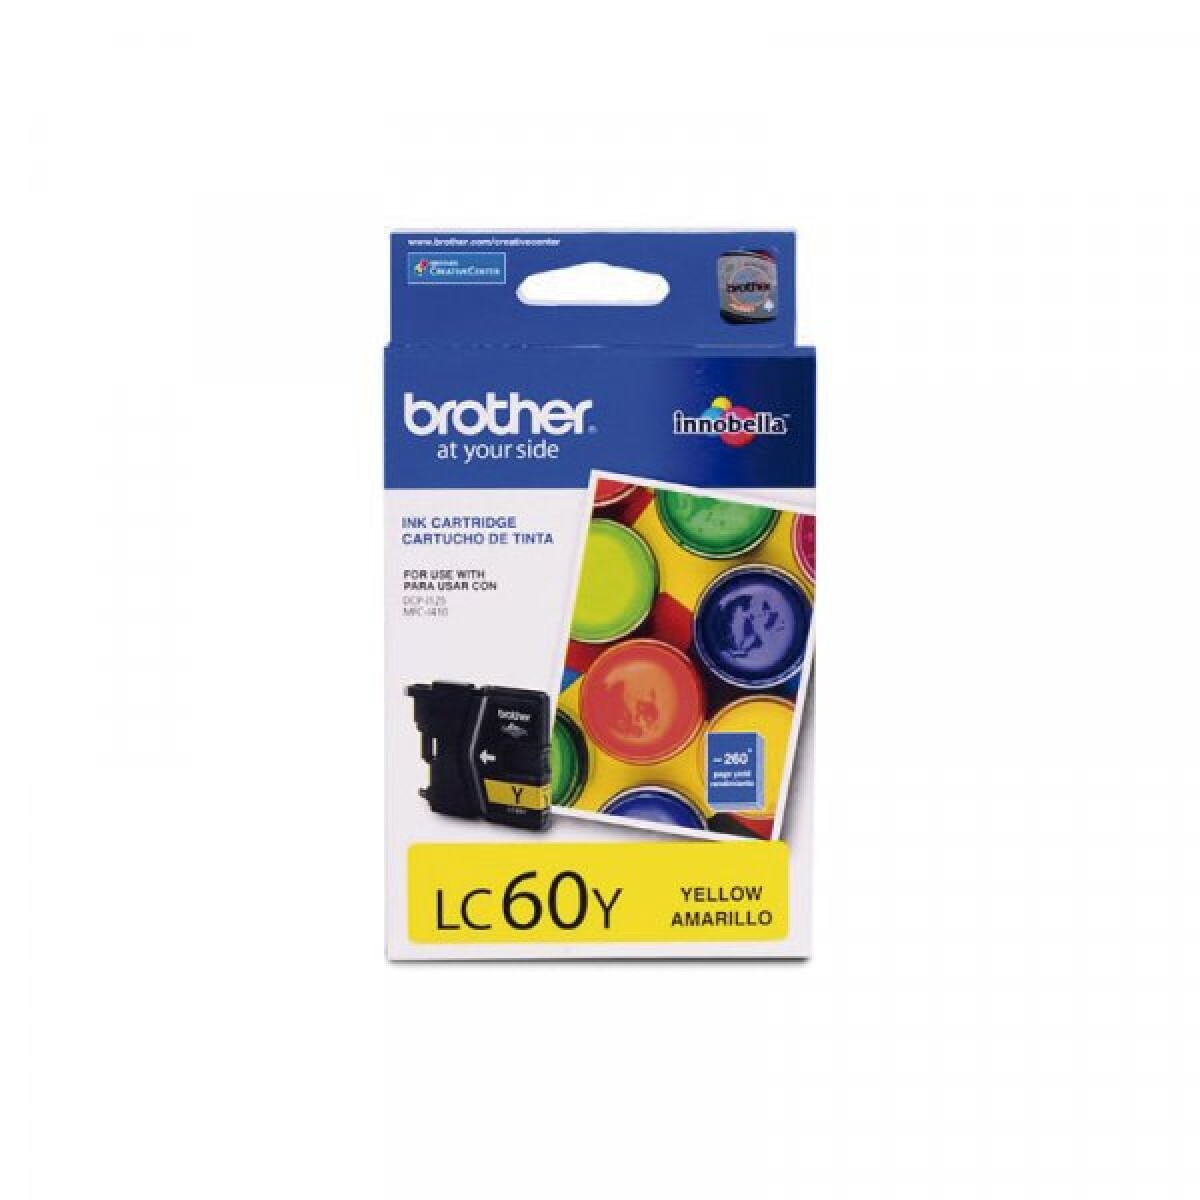 BROTHER LC60Y MFC-J410/DCP-140/DCP-J125/MFC240C AMARILLO - Brother Lc60y Mfc-j410/dcp-140/dcp-j125/mfc240c Amarillo 